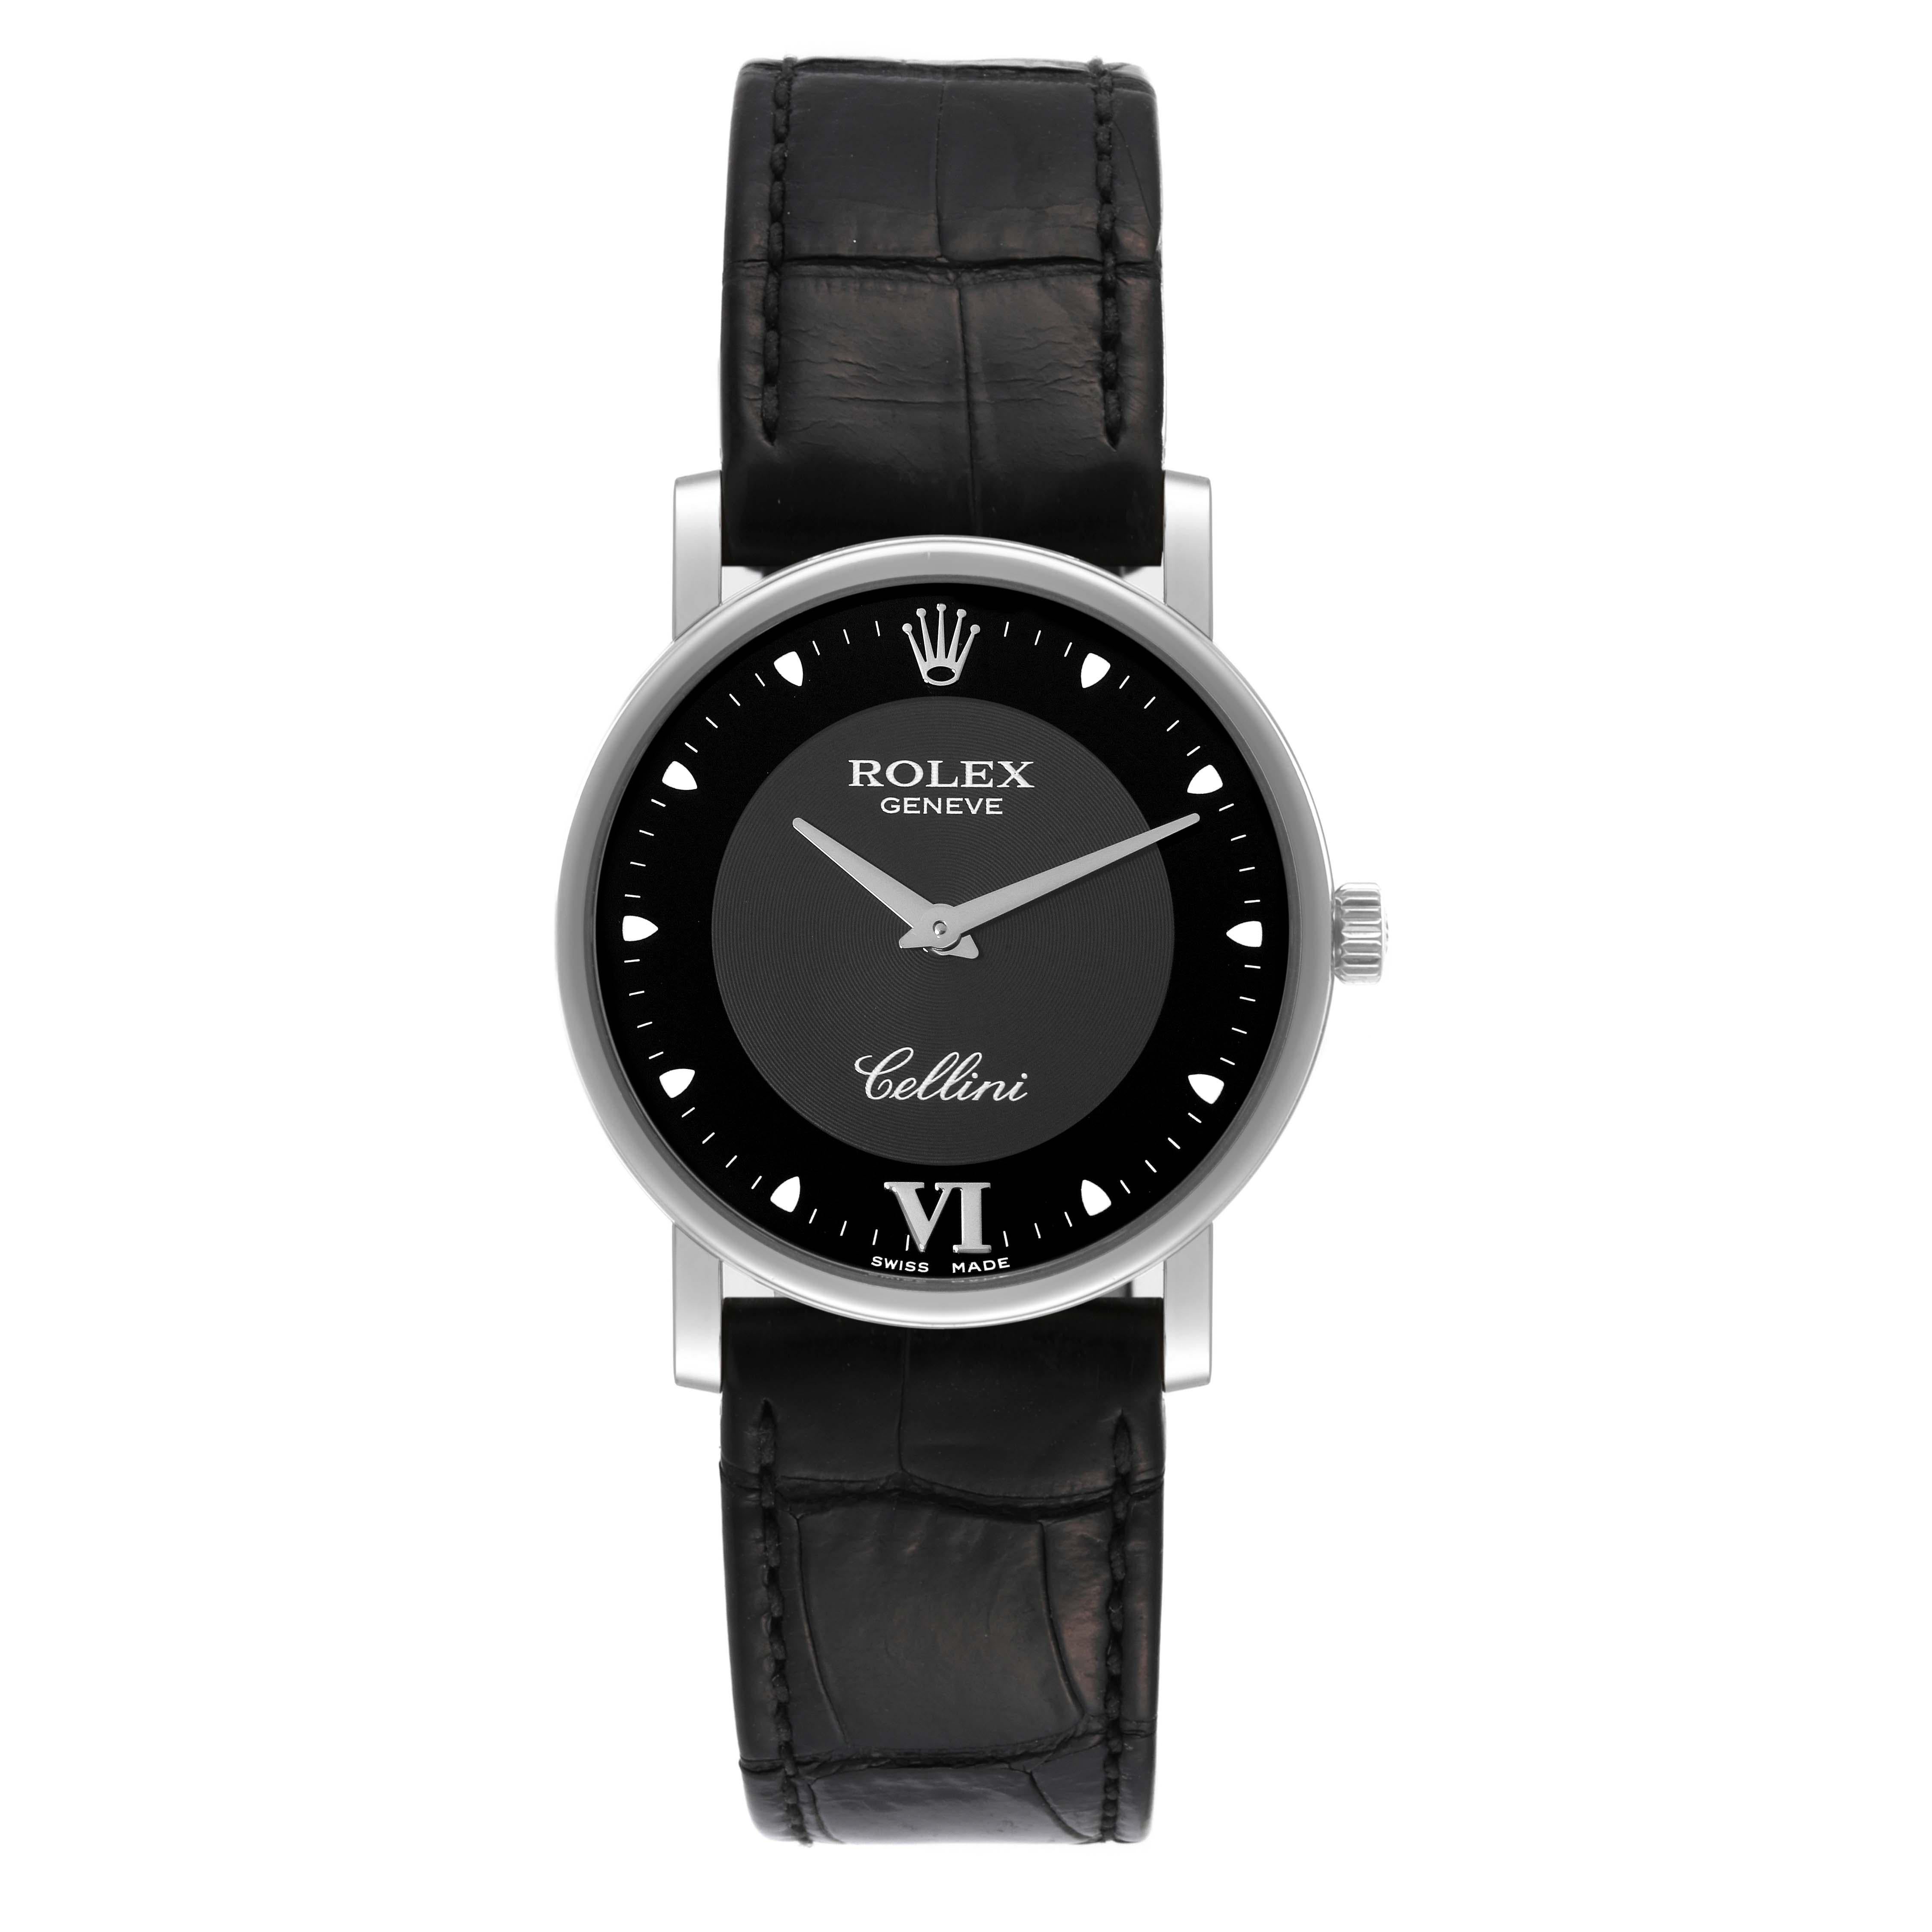 Rolex Cellini Classic 32mm White Gold Black Dial Mens Watch 5115 Card. Manual winding movement. 18K white gold slim case 31.8 x 5.5 mm in diameter. Rolex logo on a crown. . Scratch resistant sapphire crystal. Flat profile. Black dial with dot hour